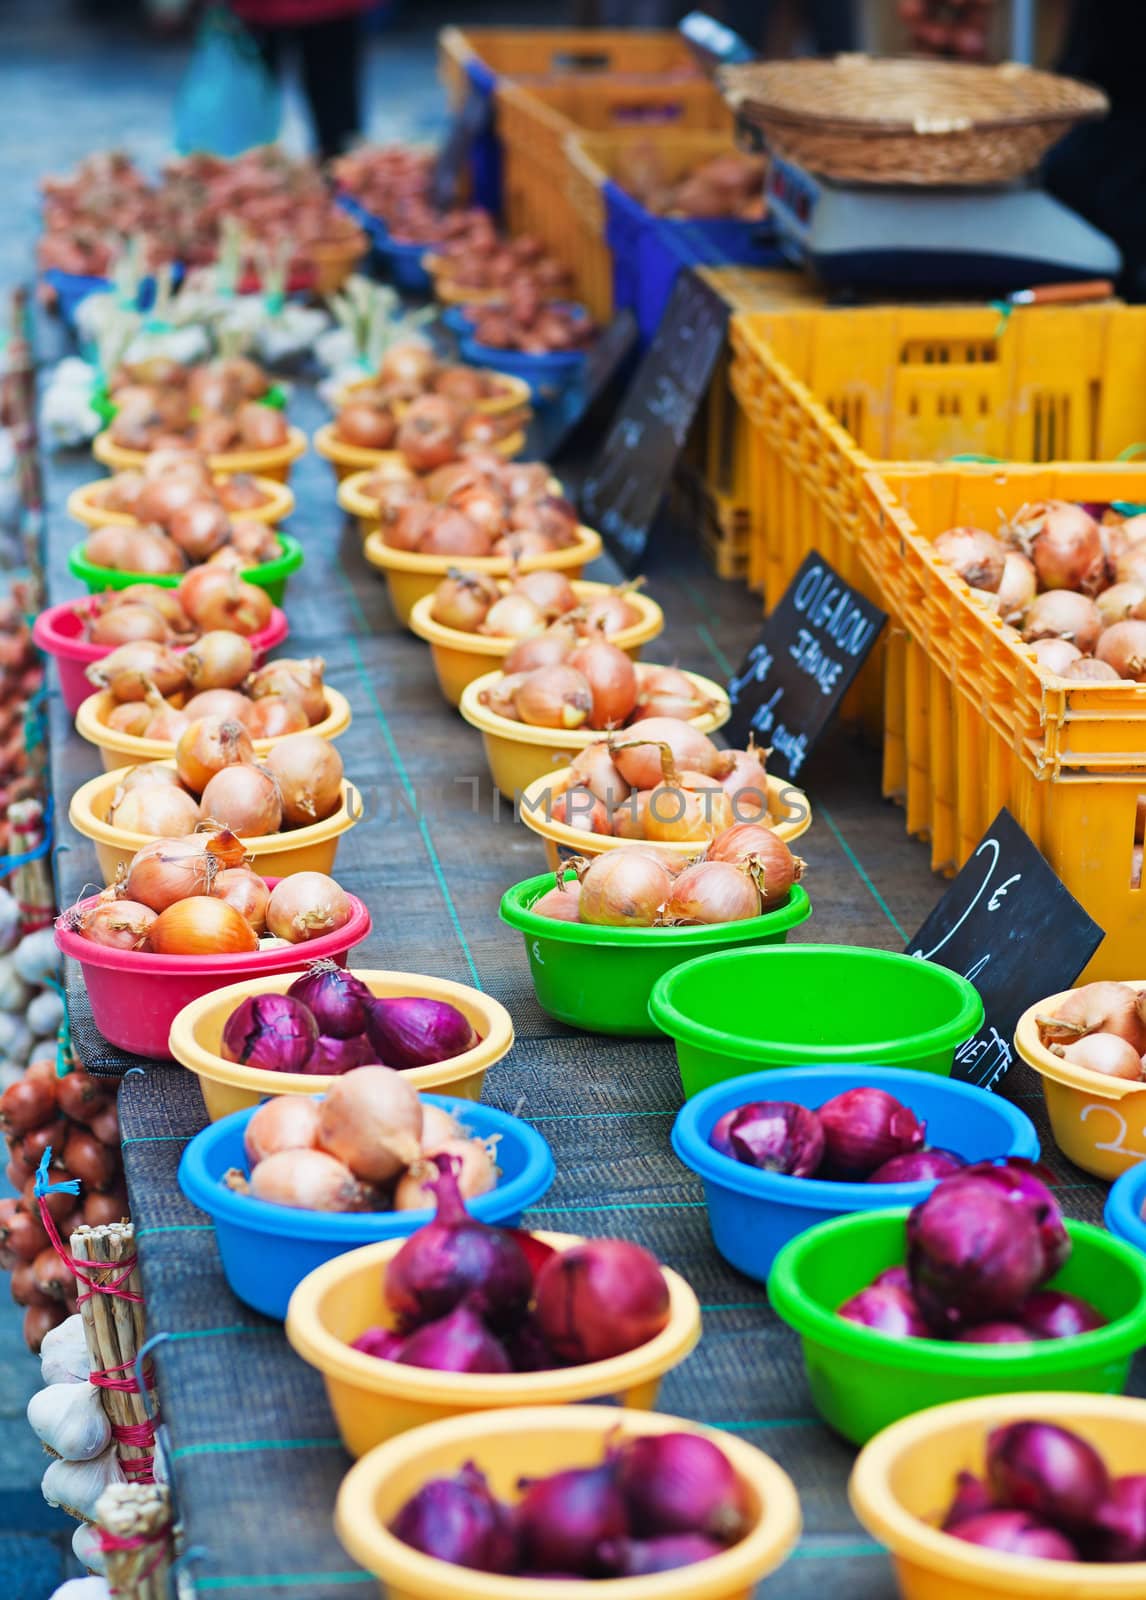 Farm market counter filled with colorful plastic bowls full of onions